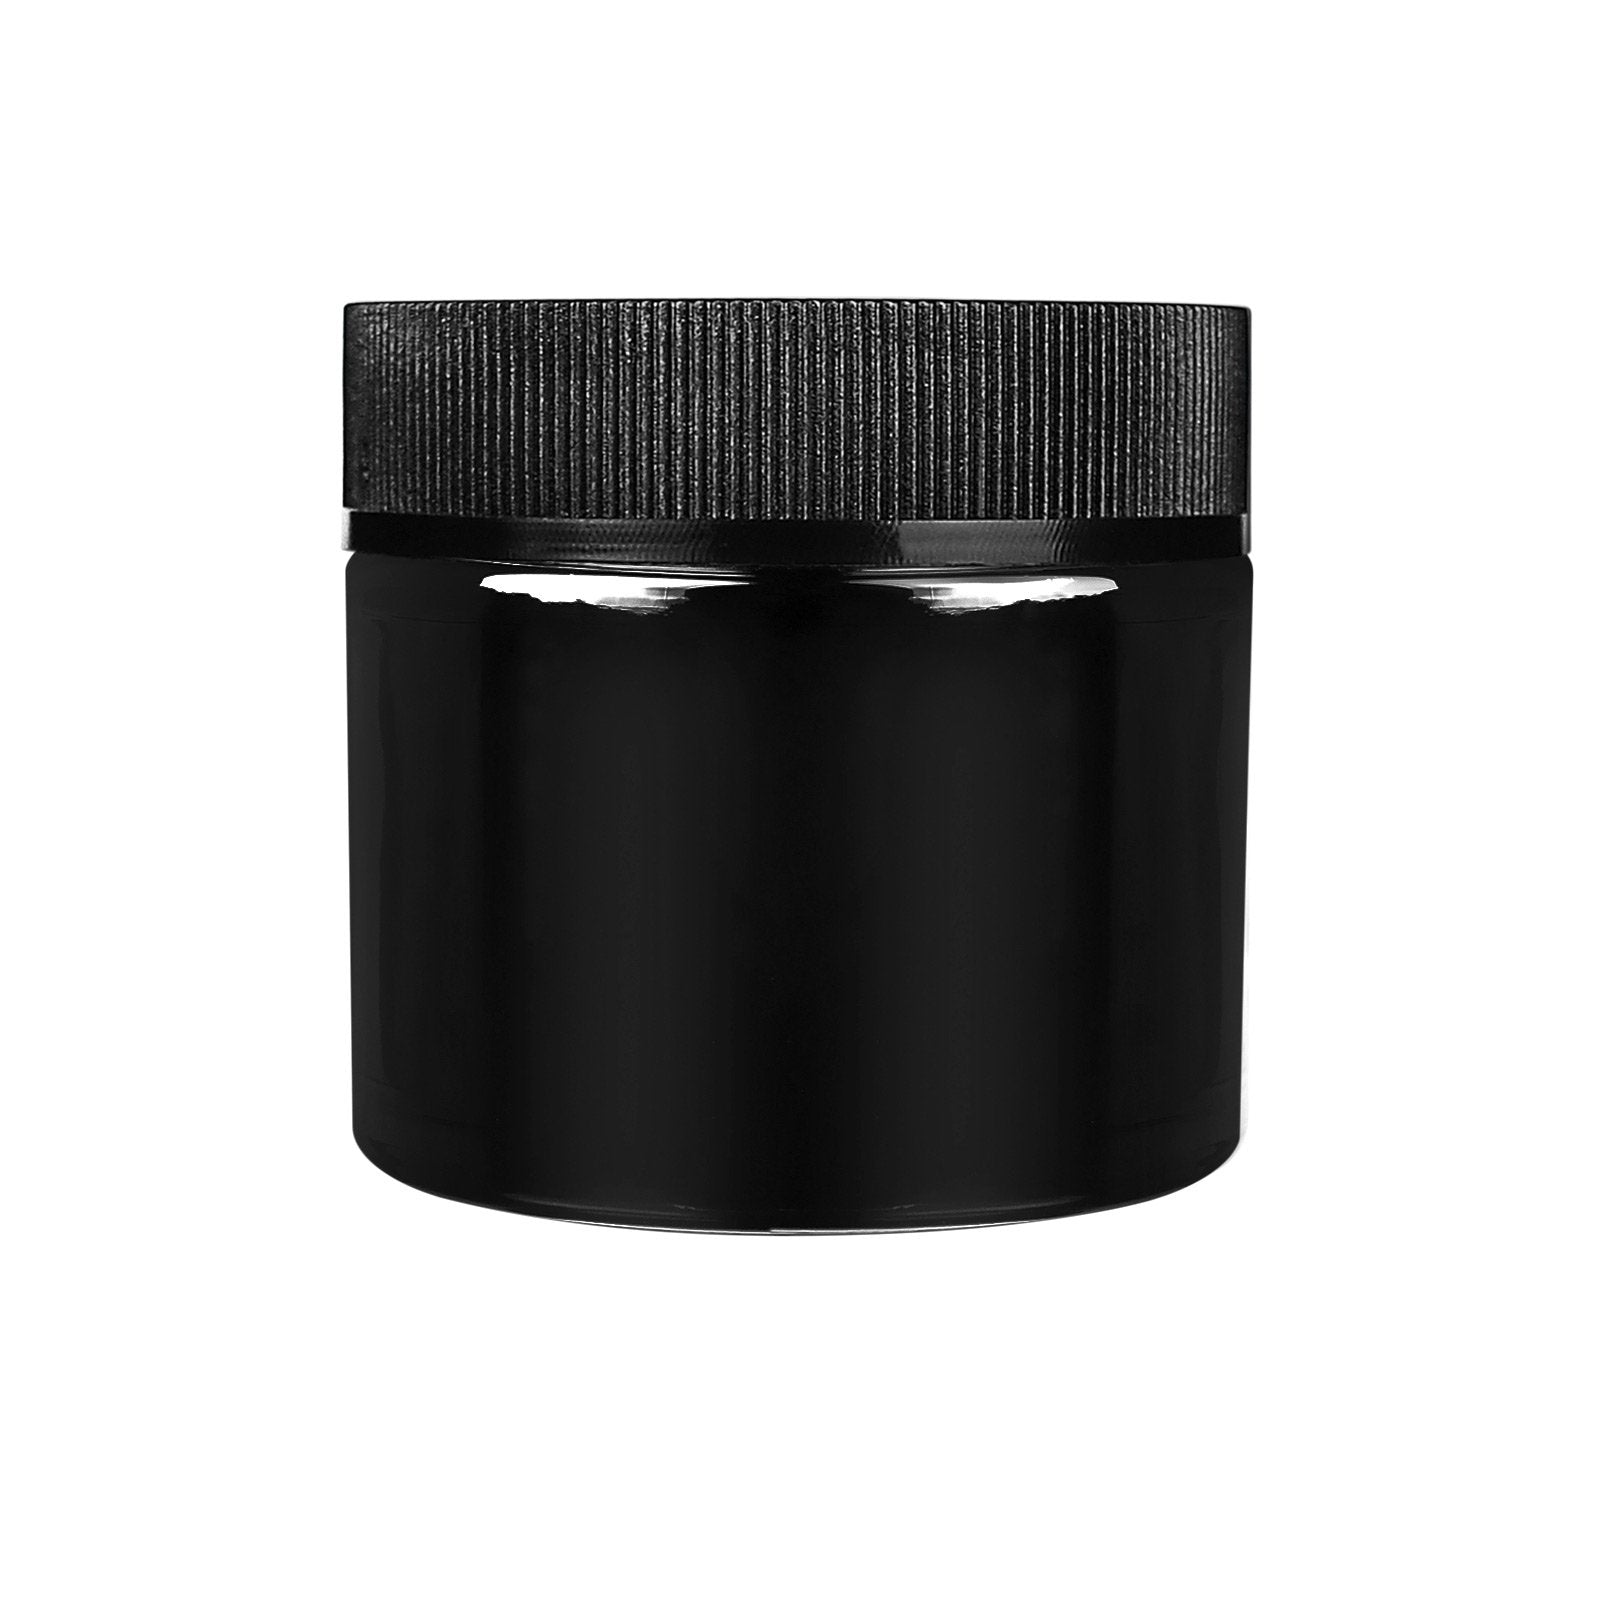 https://cdn.shopify.com/s/files/1/0158/8418/9744/products/2oz-child-resistant-black-glass-jars-with-cap-25-grams-200-count-flower-power-packages-434803.jpg?v=1601415391